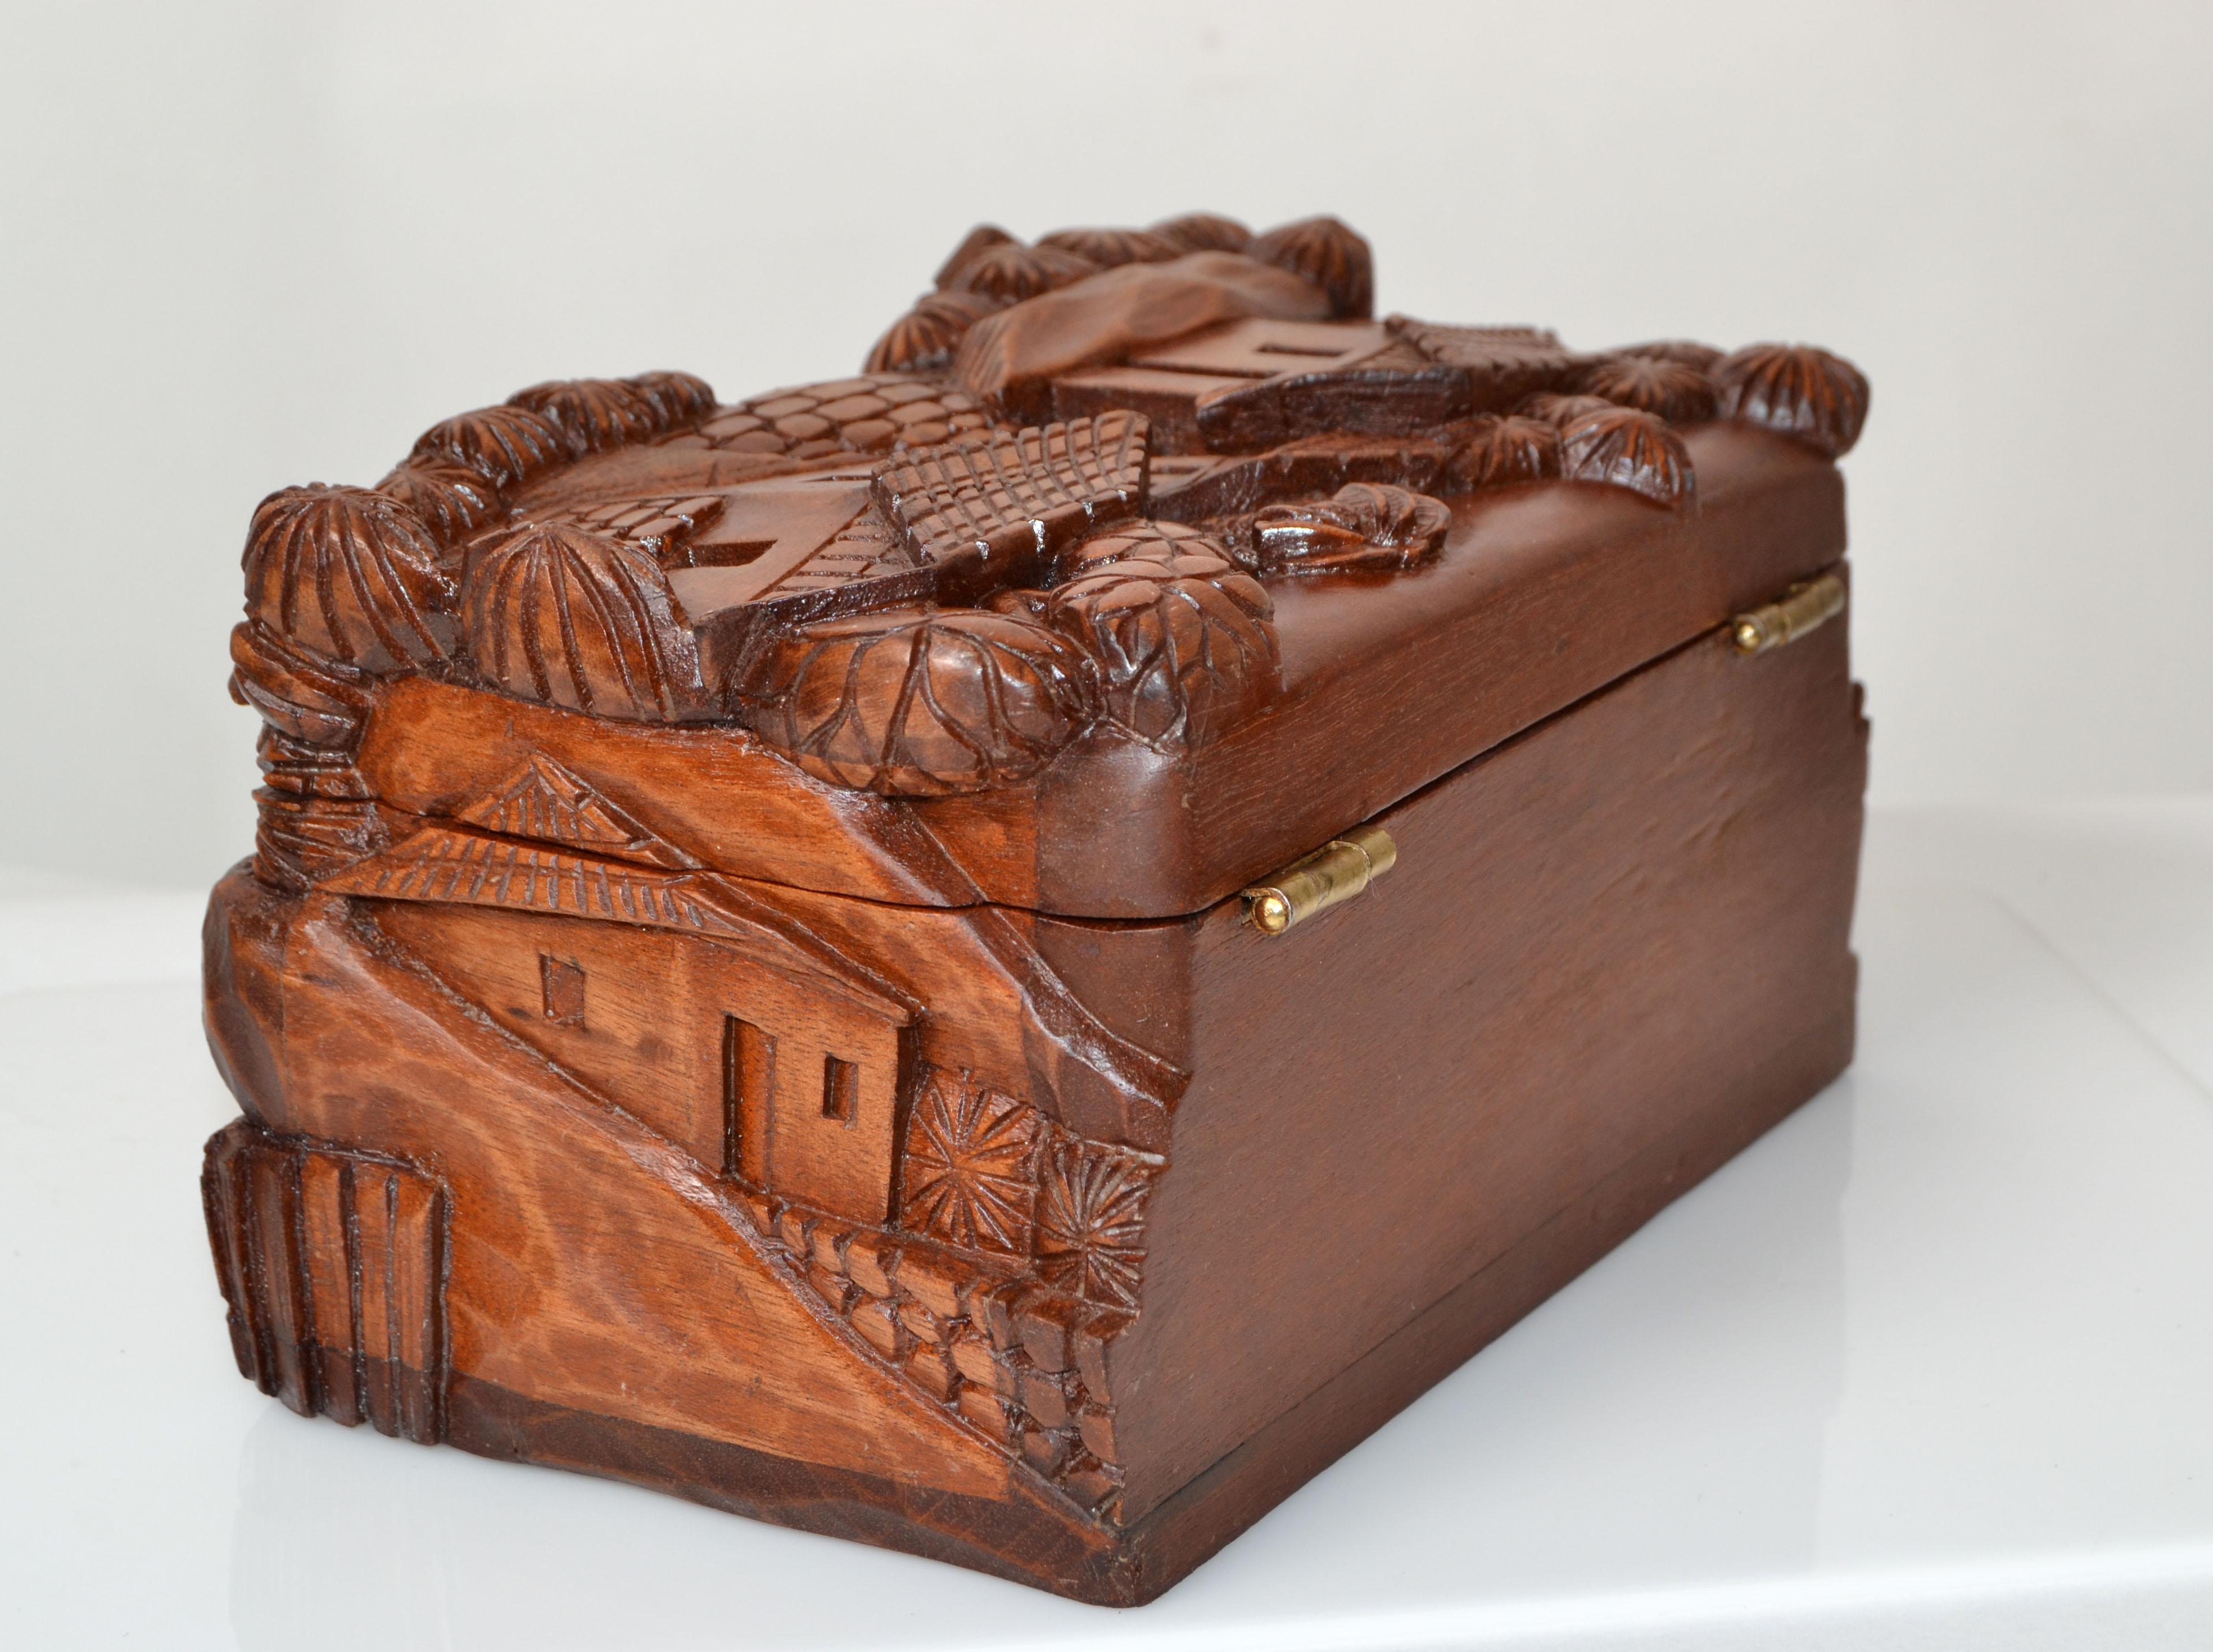 Vintage Handcrafted and Carved Wood Box House Motif, Trinket Box, Keepsake Box   In Good Condition For Sale In Miami, FL